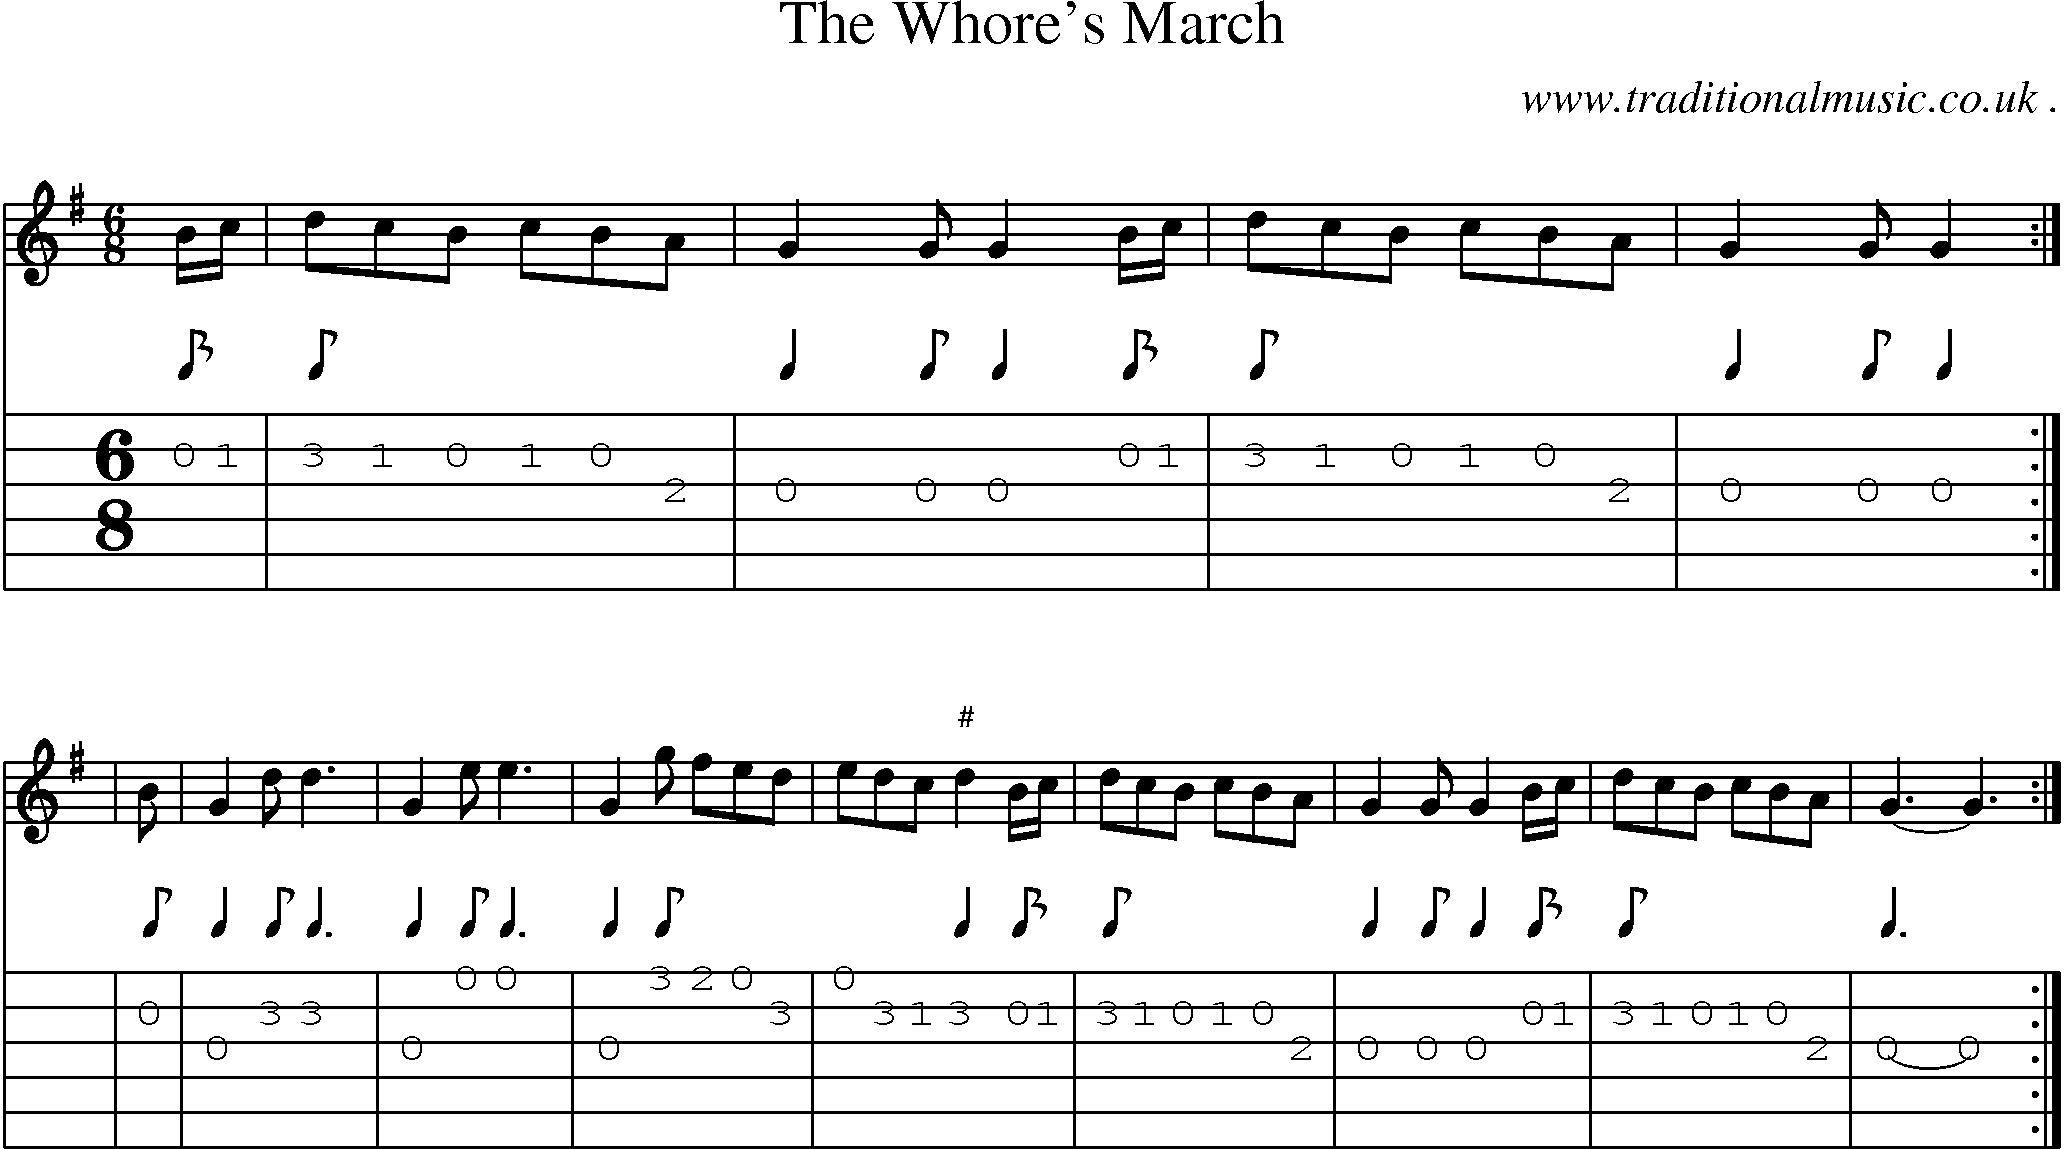 Sheet-music  score, Chords and Guitar Tabs for The Whores March